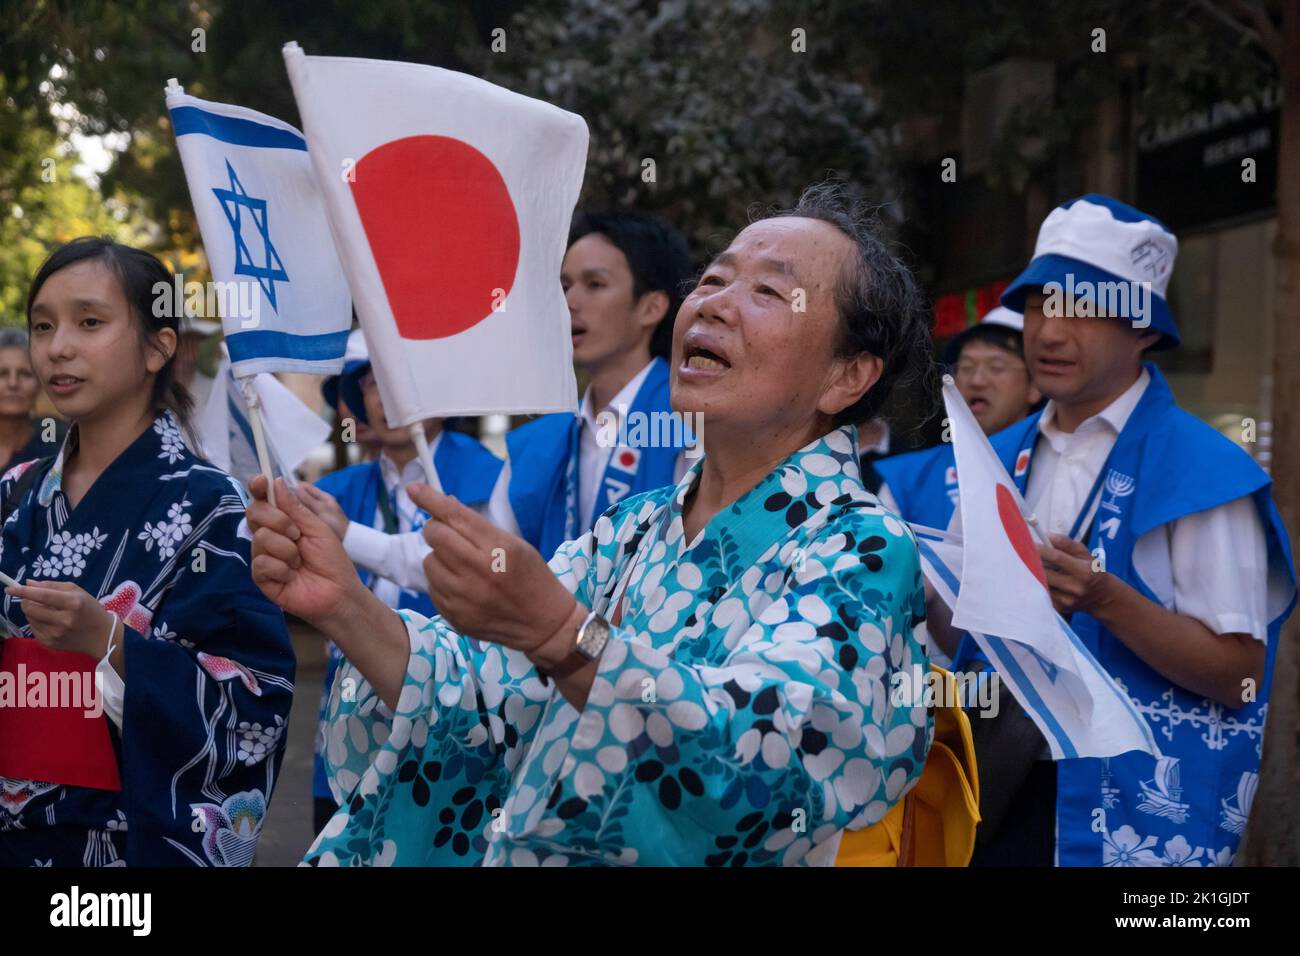 Members of the Japanese Makuya movement wave the national flags of Israel and Japan and sing iconic Jewish songs in Zion Square on September 18, 2022 in downtown Jerusalem, Israel. The Makuya movement is a religious movement which was founded in 1948 in Japan, Its members are passionate supporters of Israel and consider the establishment of the Jewish state and the unification of Jerusalem 19 years later to be the fulfillment of biblical prophecies. Stock Photo